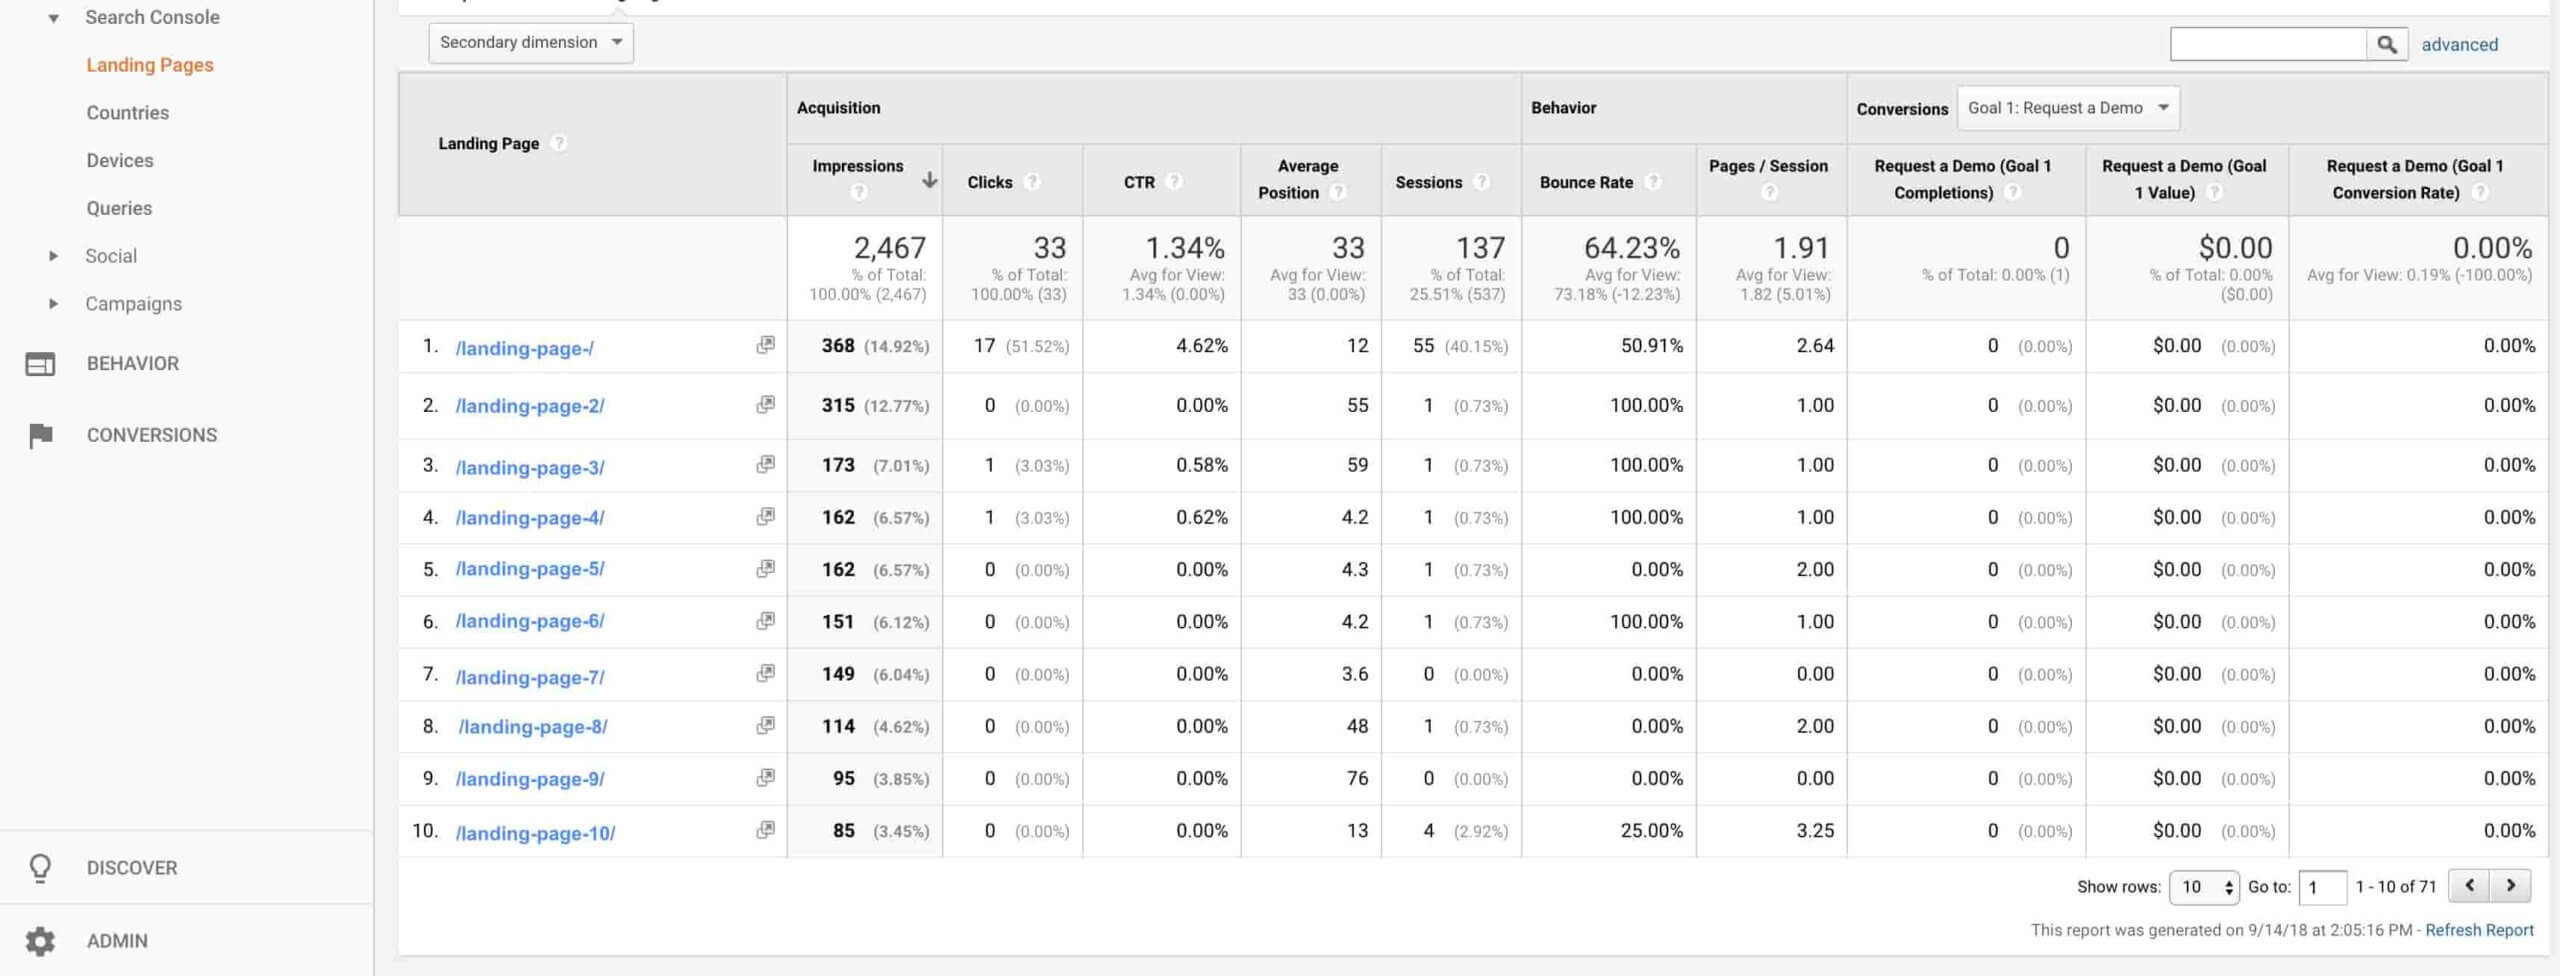 link-google-analytics-to-search-console_Landing-Pages-min